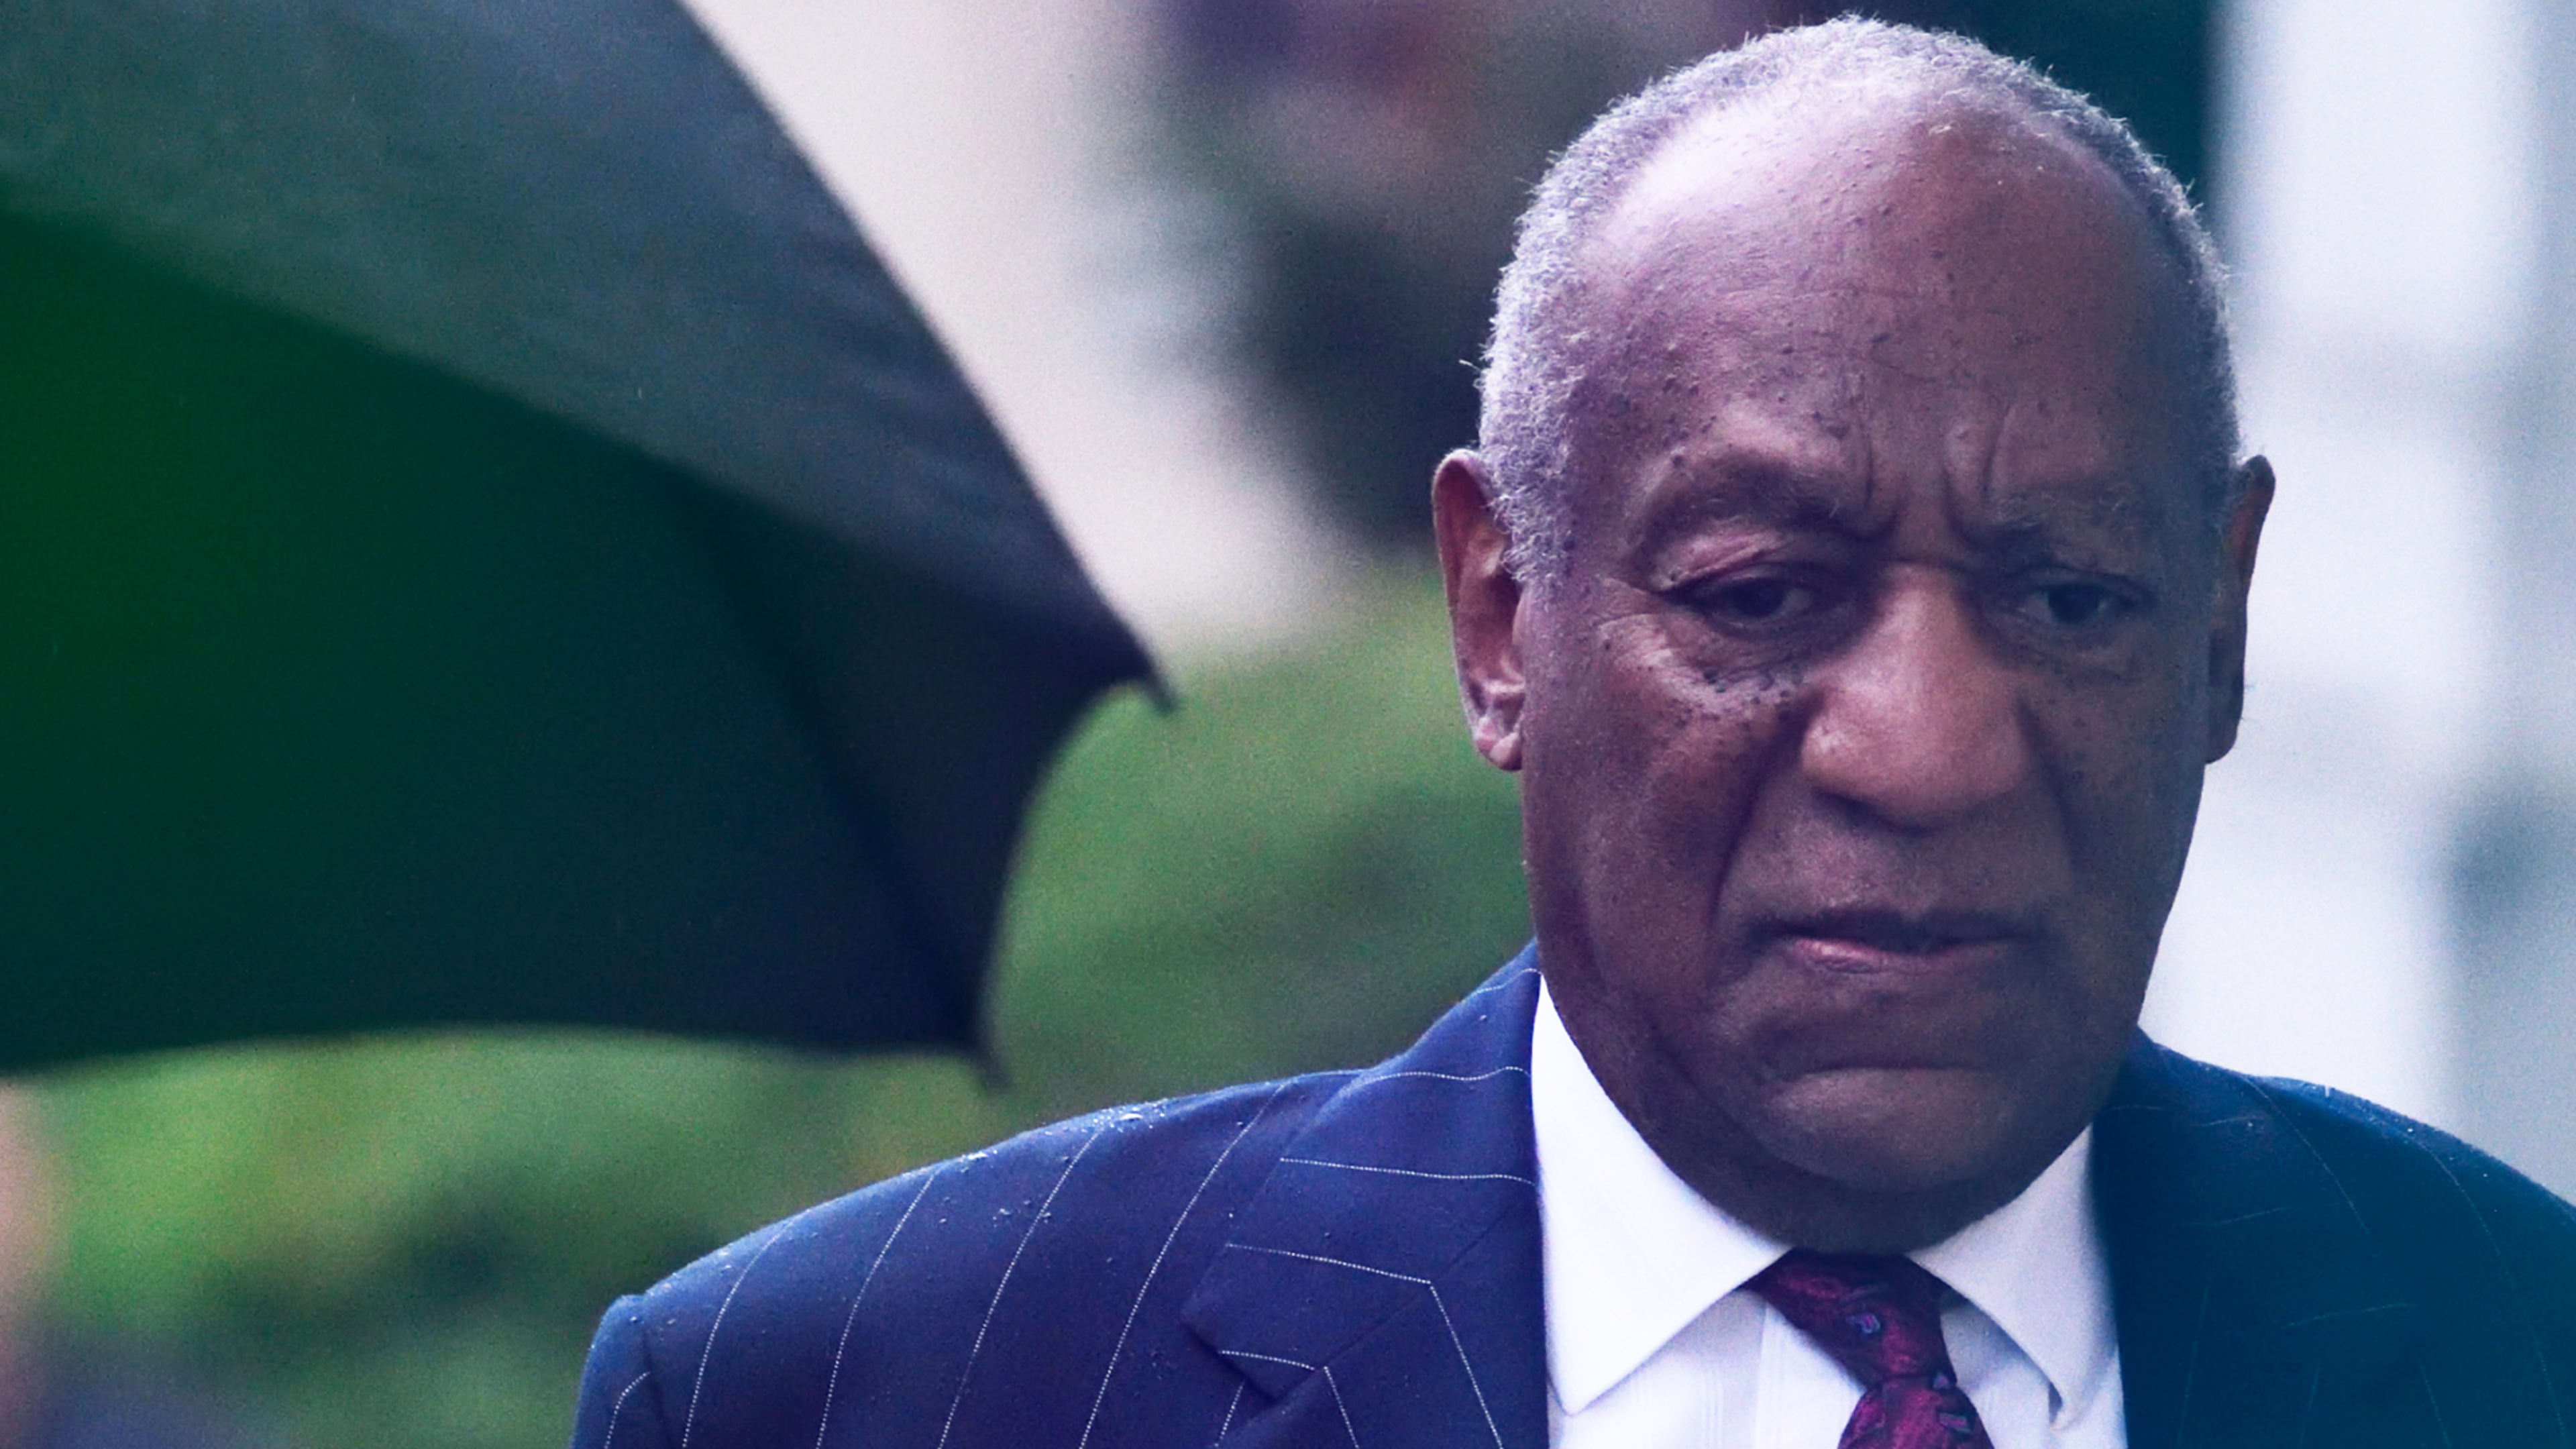 Bill Cosby sentenced to three to 10 years in prison